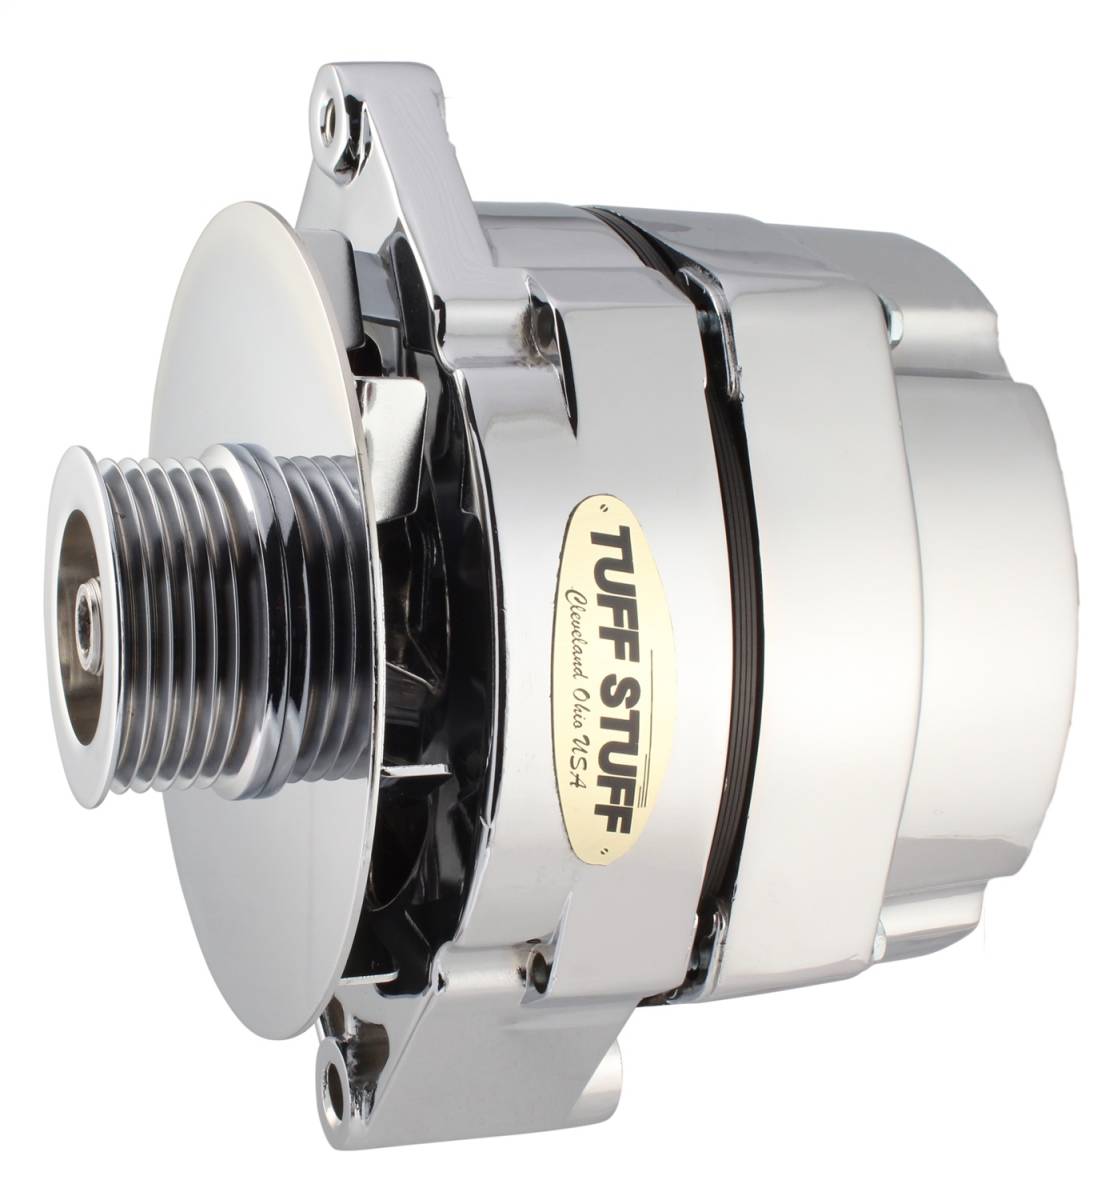 Tuff Stuff Performance - Alternator 100 AMP OEM Or 1 Wire 6 Groove Serpentine Pulley Chrome 7127ND6G